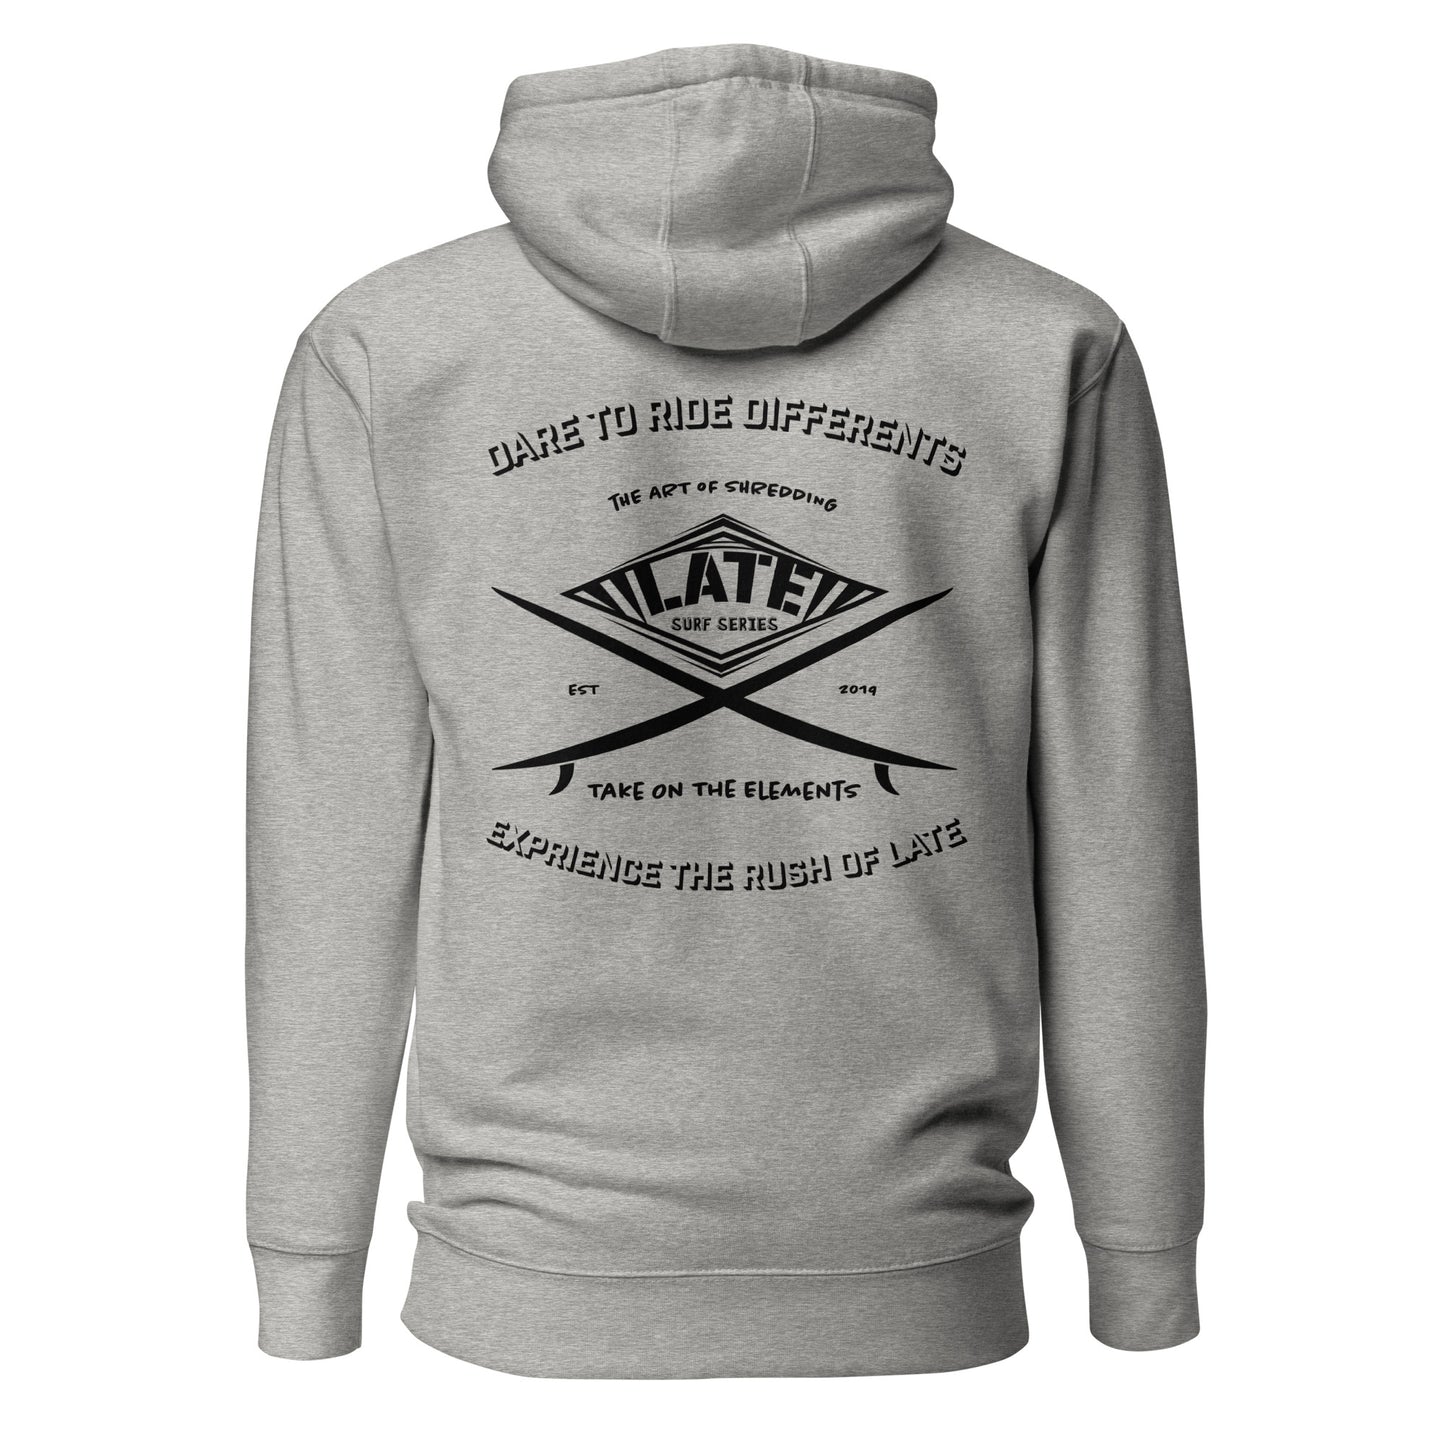 Hoodie surf gris dare to ride differents / the art of shredding / take on the elements / Logo Late surf series